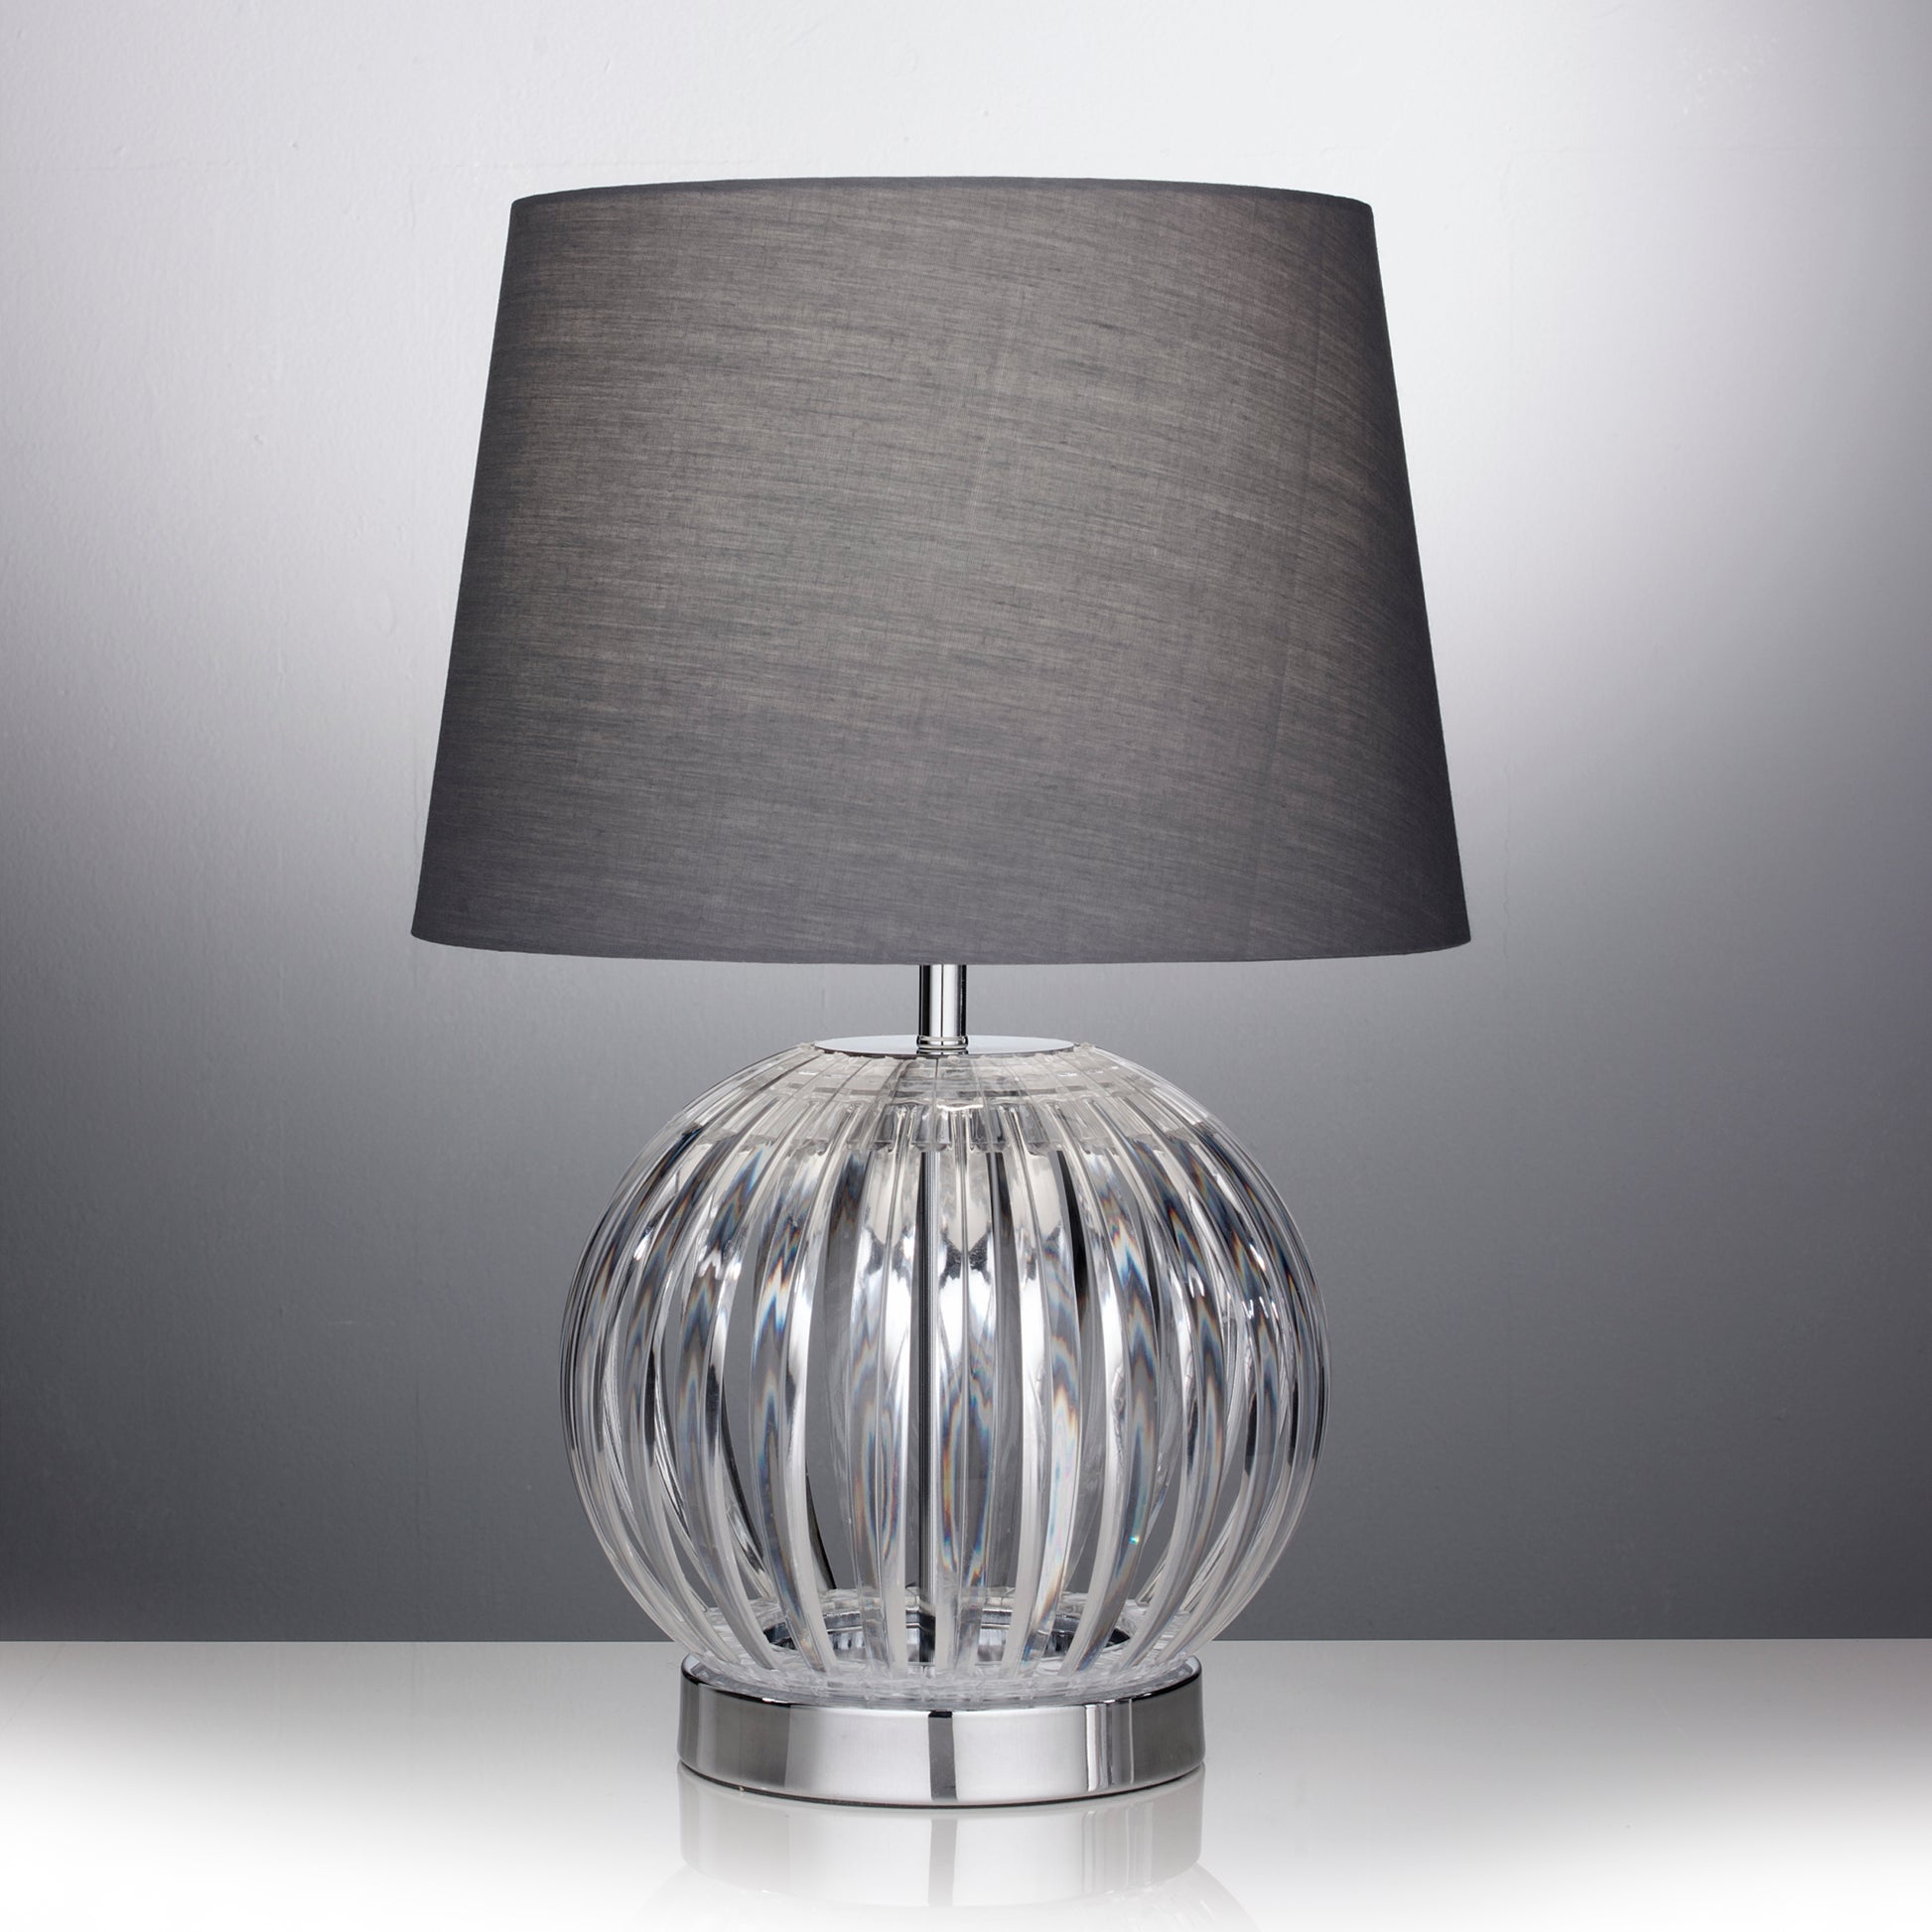 Modern Round Table Lamp with Acrylic Base and Grey Lamp shade